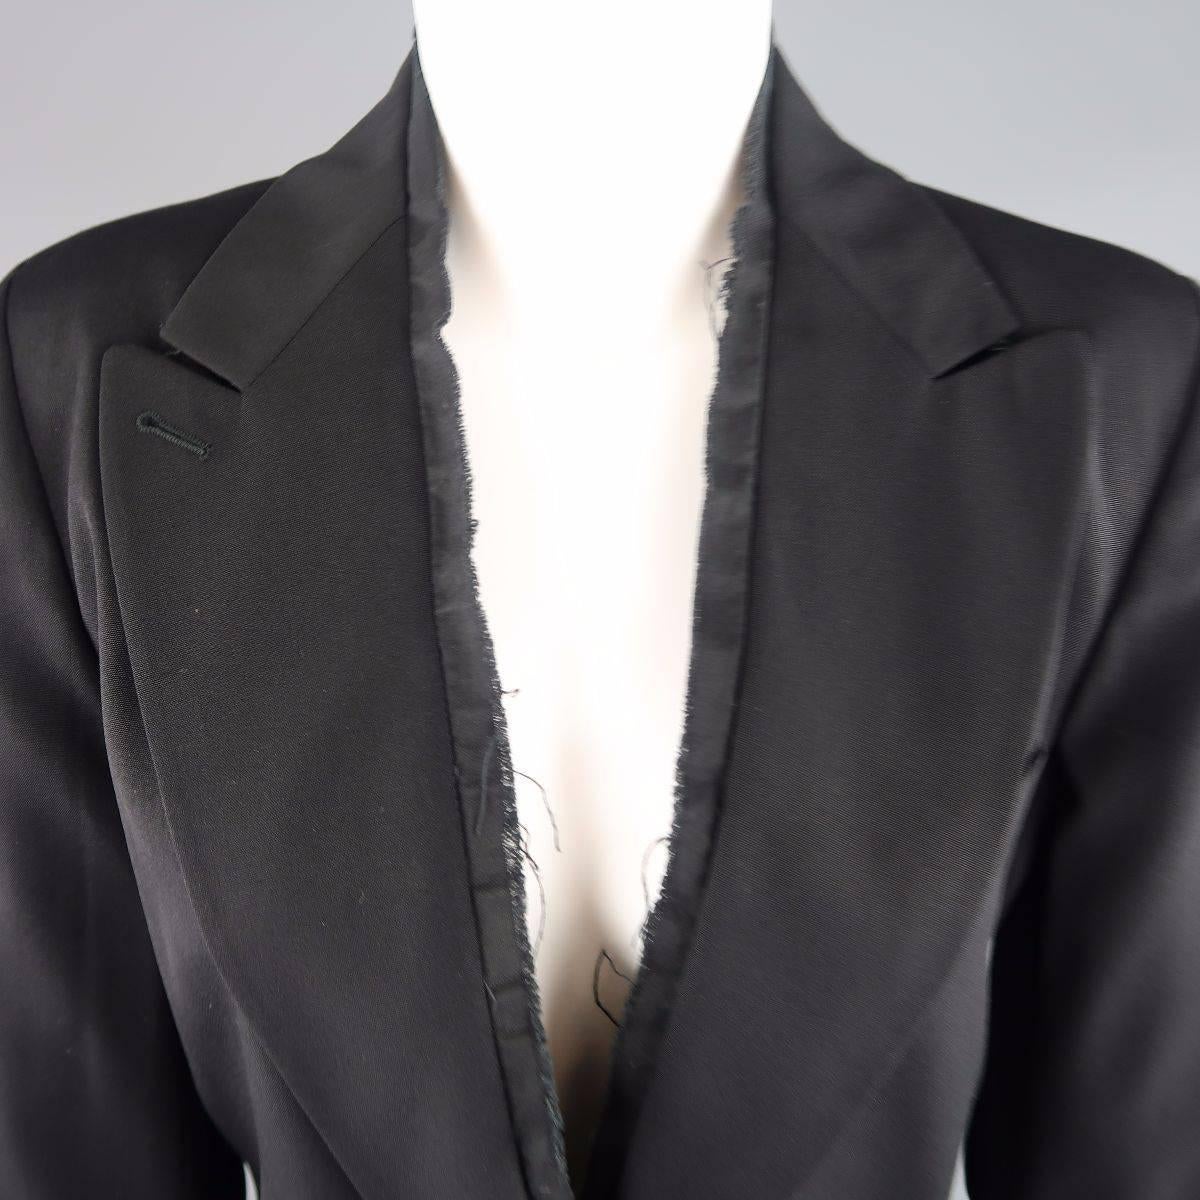 ANN DEMEALEMEESTER blazer jacket comes in black wool fabric and features a large peak lapel, single button closure, internal tie detail, and raw edge piping along the neck line. Made in Italy.
 
Good Pre-Owned Condition.
Marked: 40
 
Measurements:
